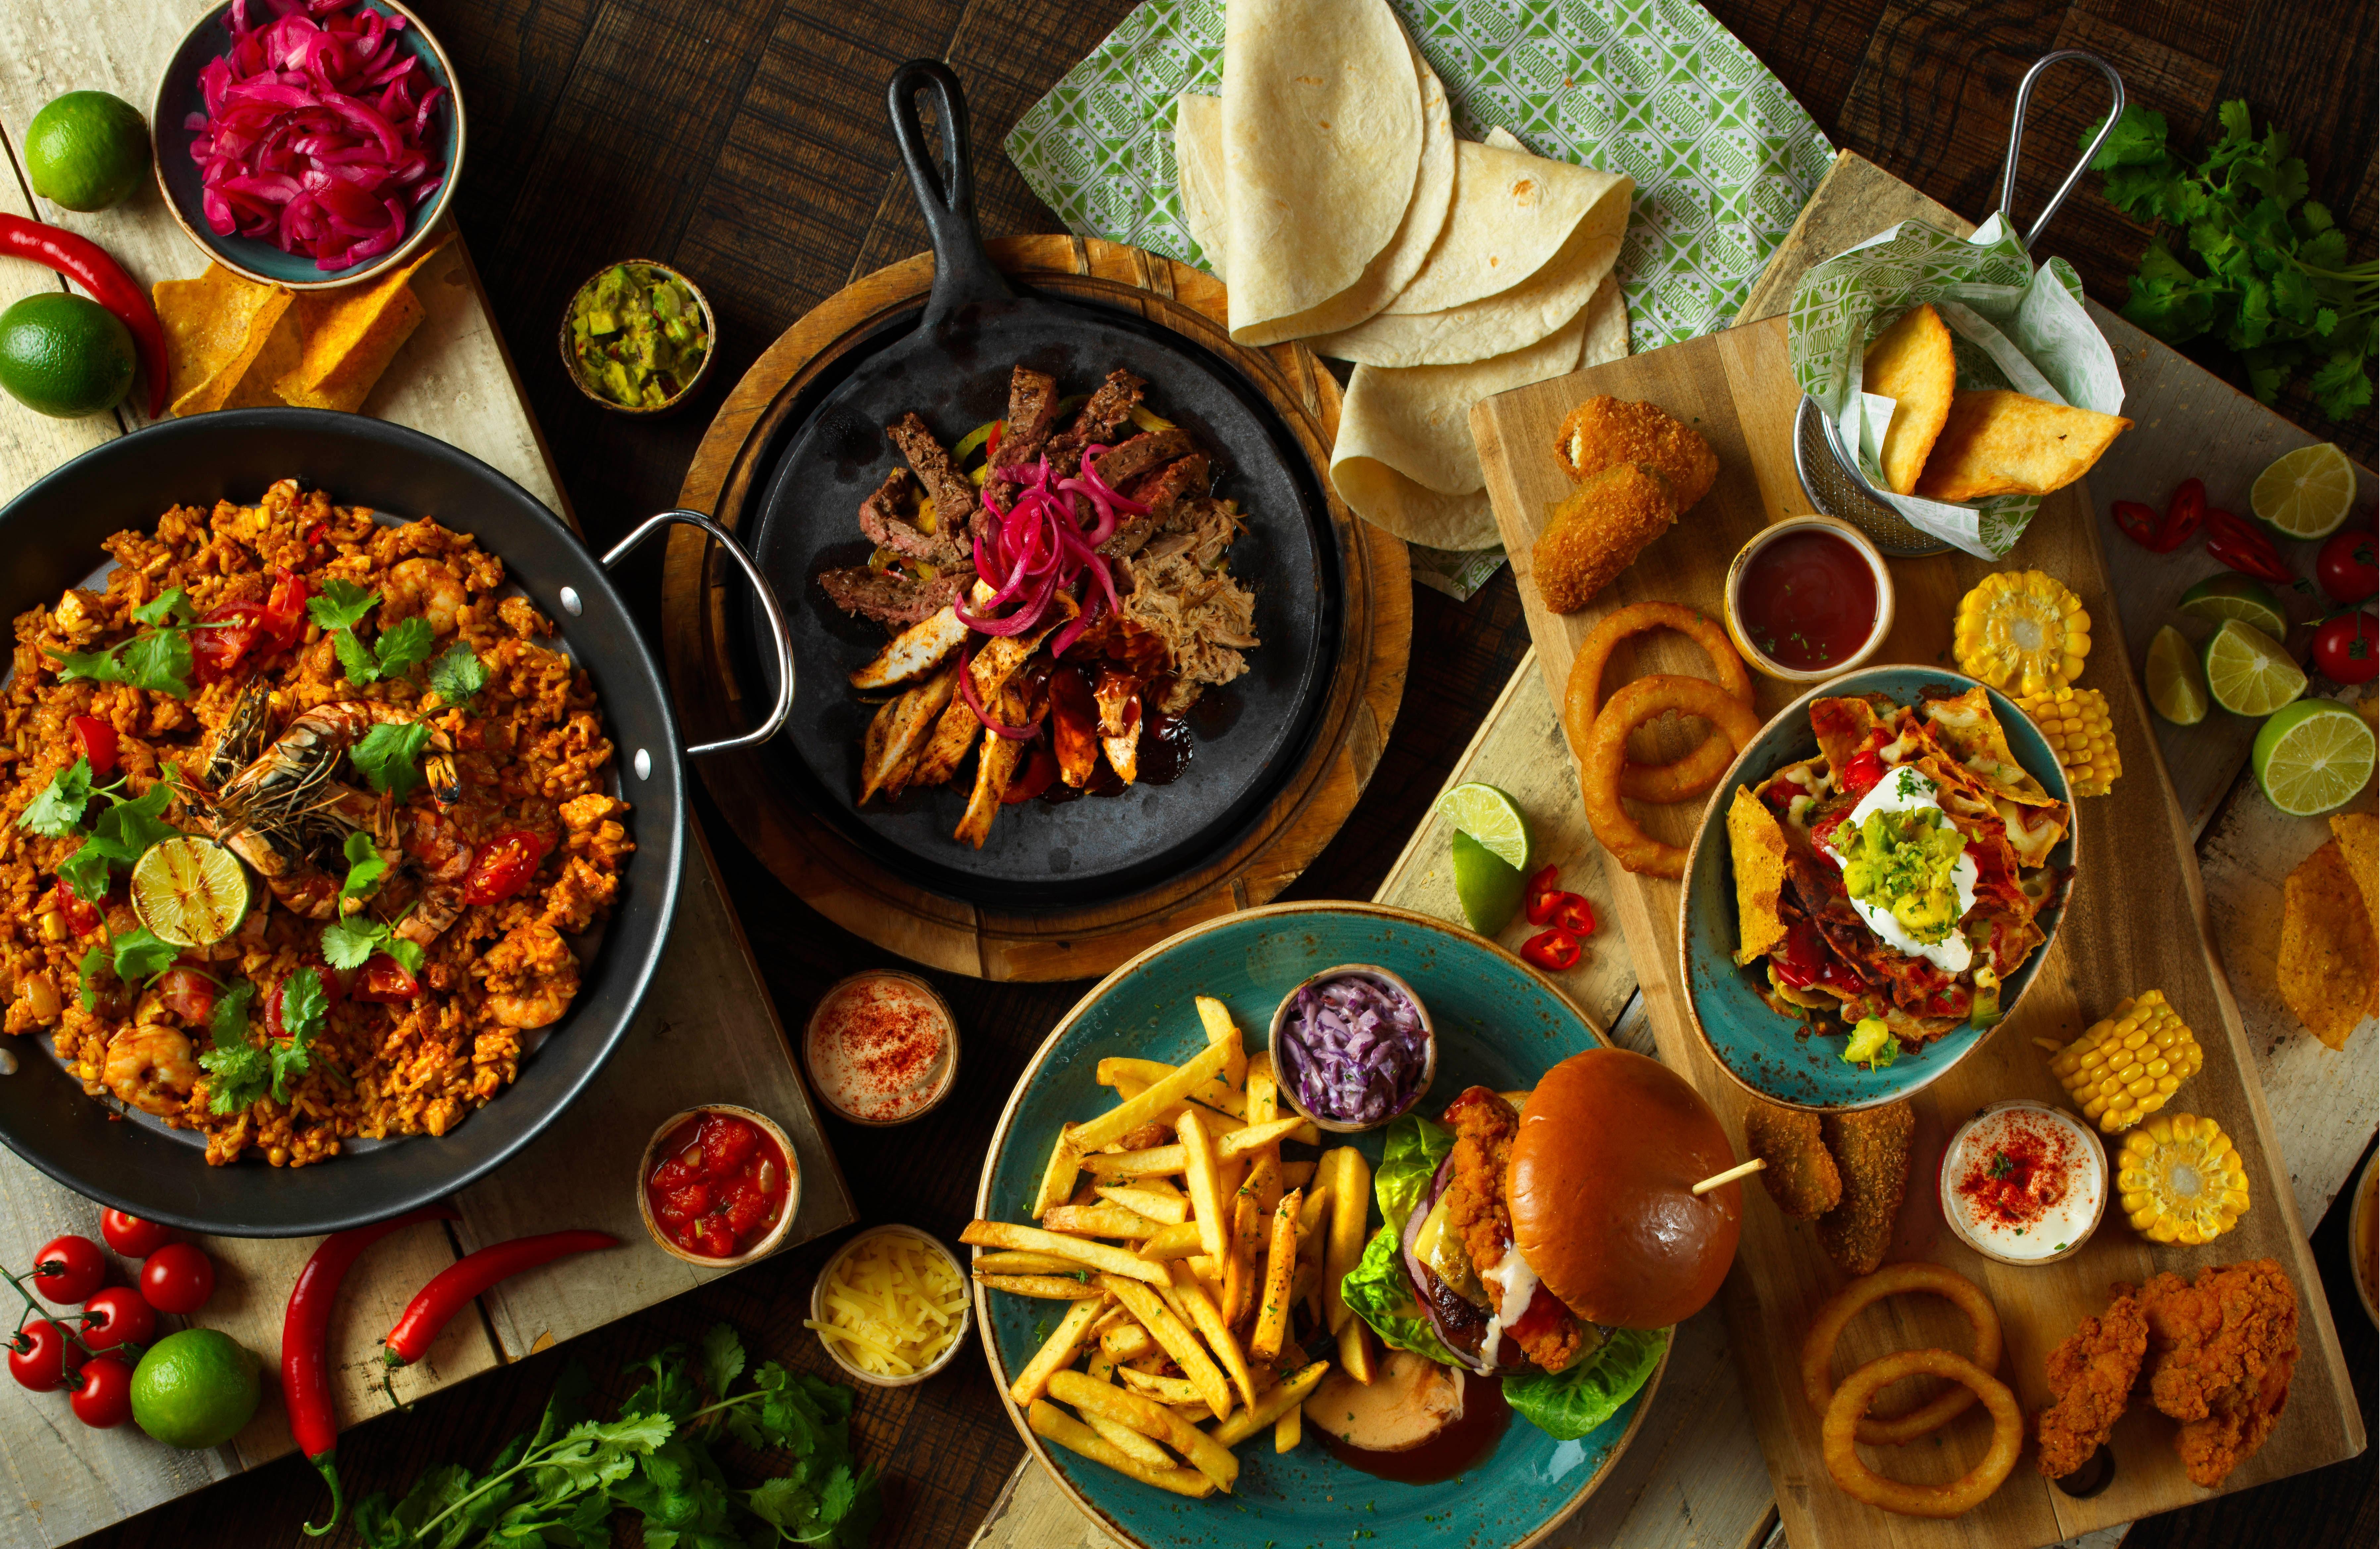 Chiquito Restaurant Bar & Mexican Grill Chiquito Dudley 01384 215130